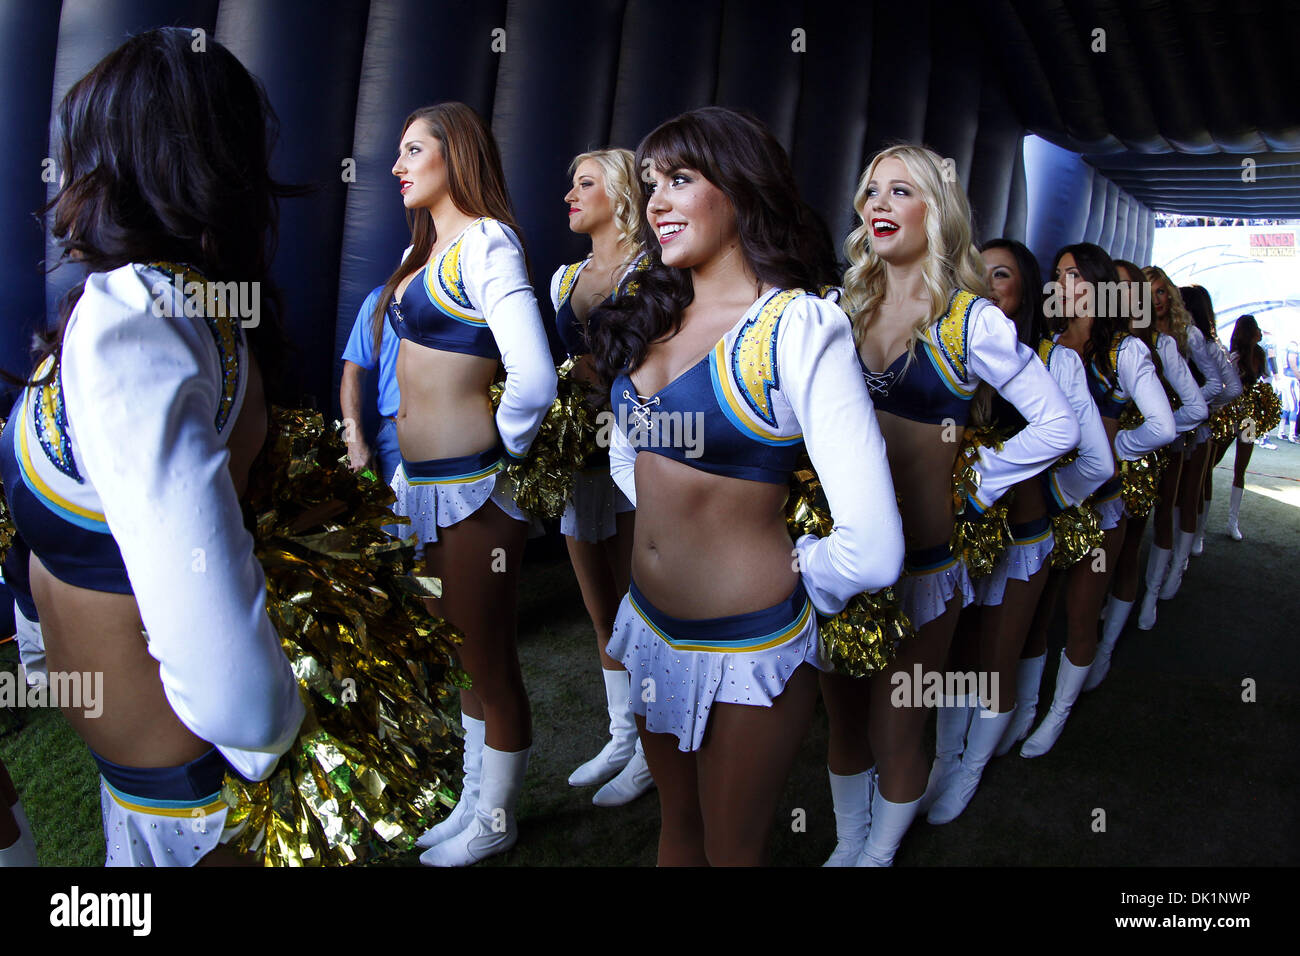 San Diego, CA, USA. 1st Dec, 2013. Dec. 1, 2011 - San Diego, California, USA - San Diego Chargers cheerleaders get ready to take the field before a NFL game against the Cincinnati Bengals at Qualcomm Stadium. Credit:  KC Alfred/ZUMAPRESS.com/Alamy Live News Stock Photo